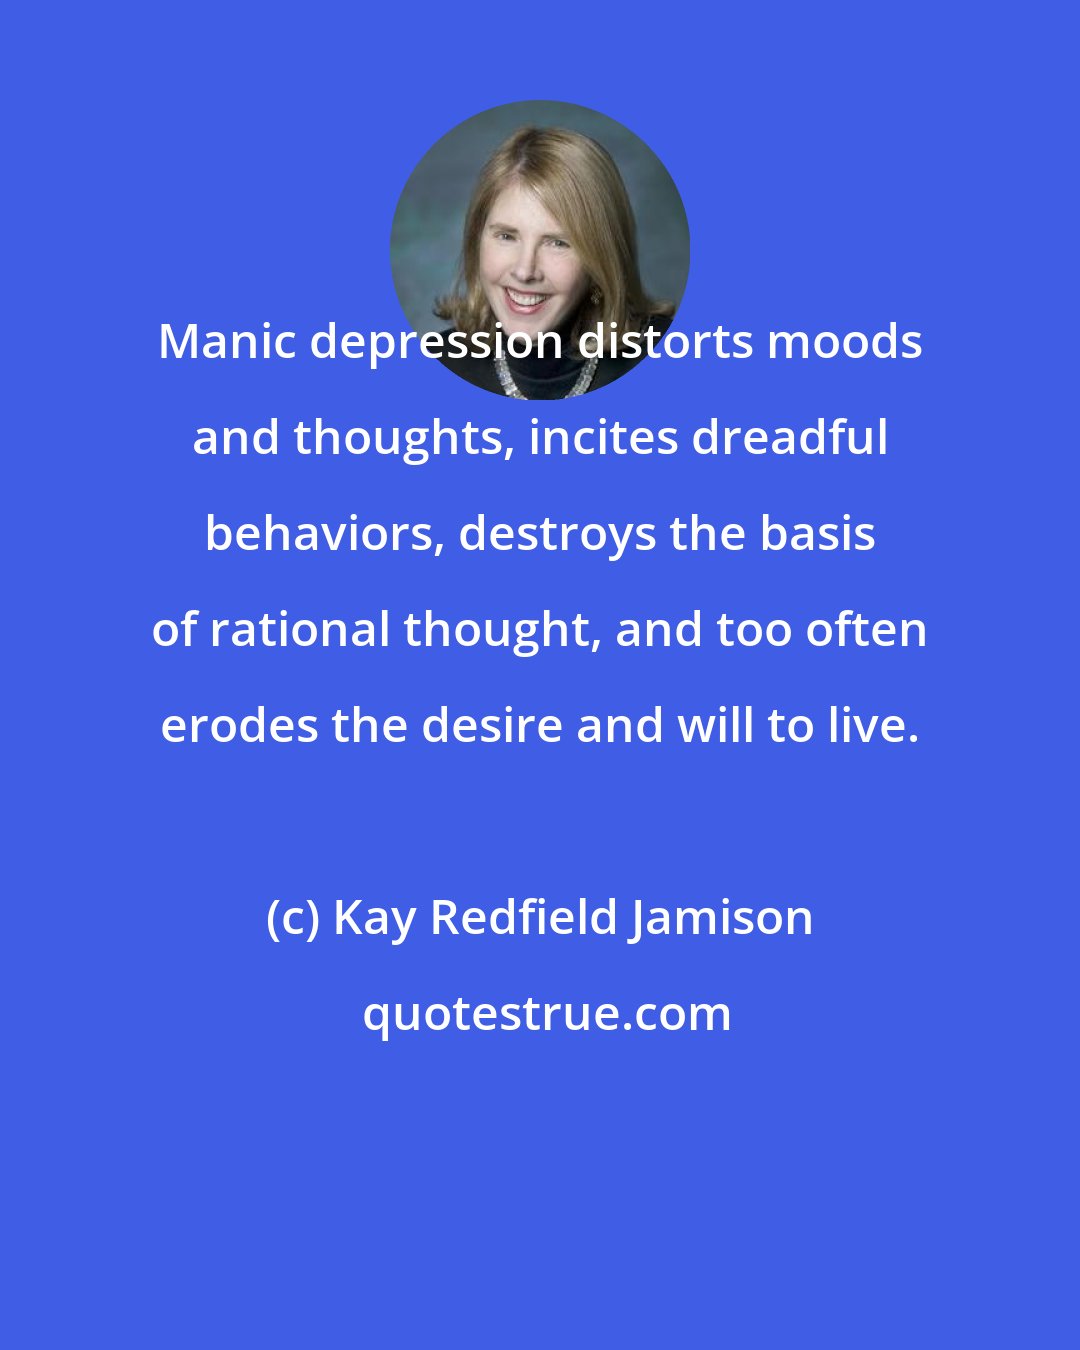 Kay Redfield Jamison: Manic depression distorts moods and thoughts, incites dreadful behaviors, destroys the basis of rational thought, and too often erodes the desire and will to live.